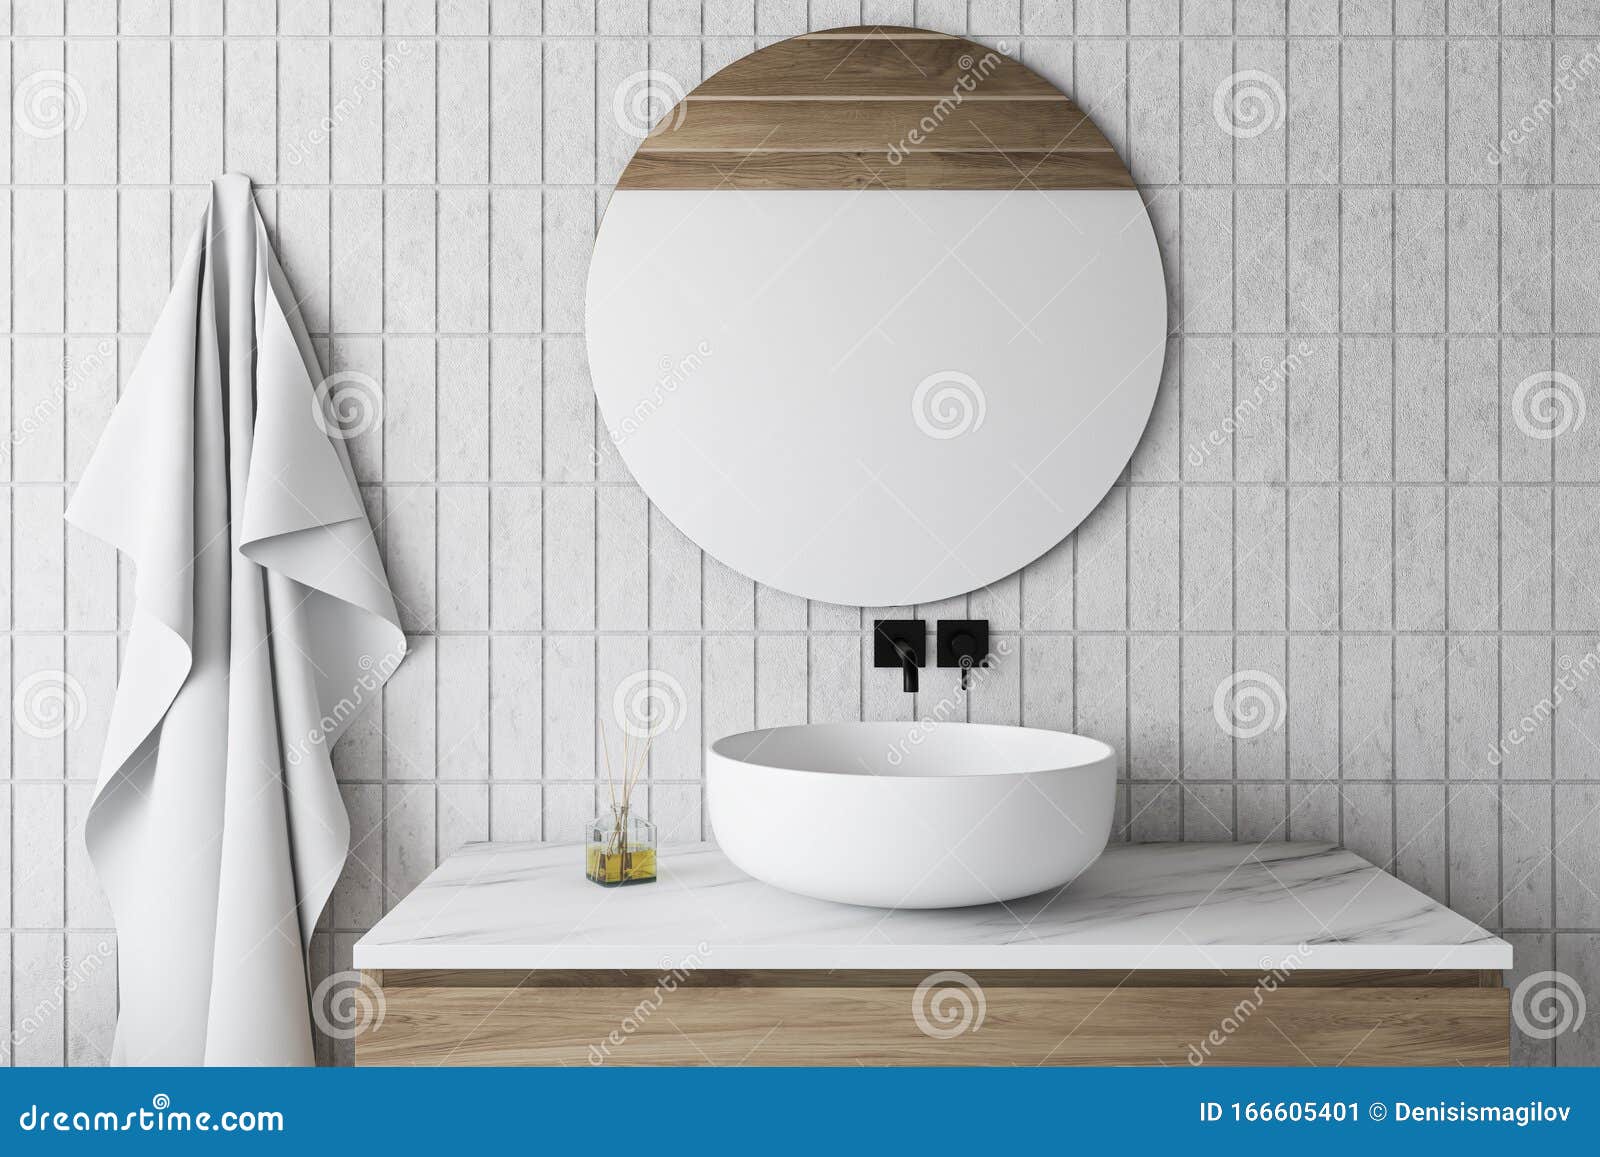 White Tile Bathroom With Sink And Round Mirror Stock Illustration